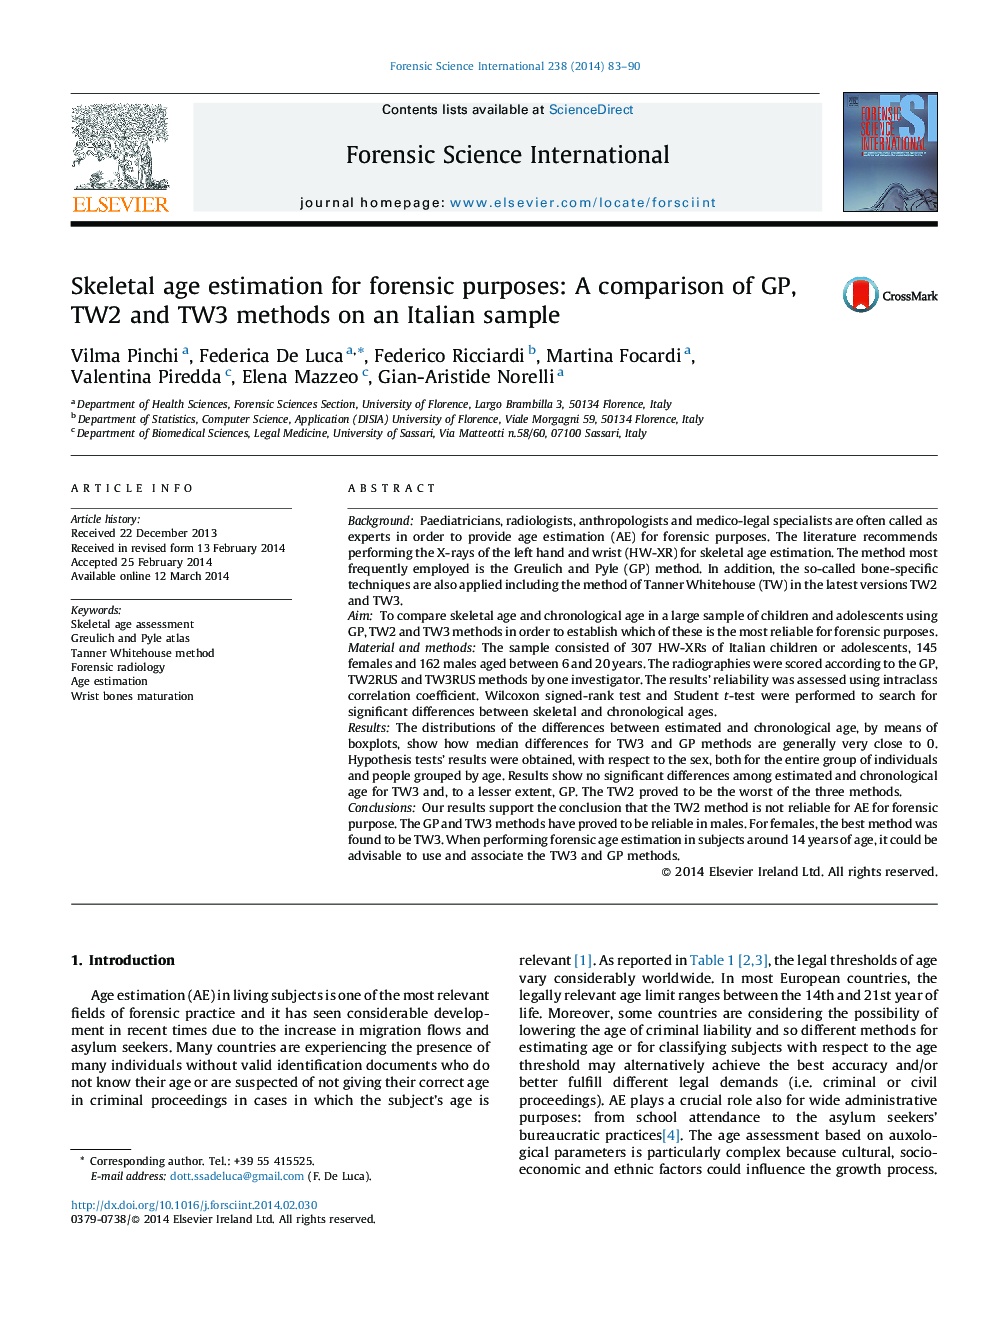 Skeletal age estimation for forensic purposes: A comparison of GP, TW2 and TW3 methods on an Italian sample